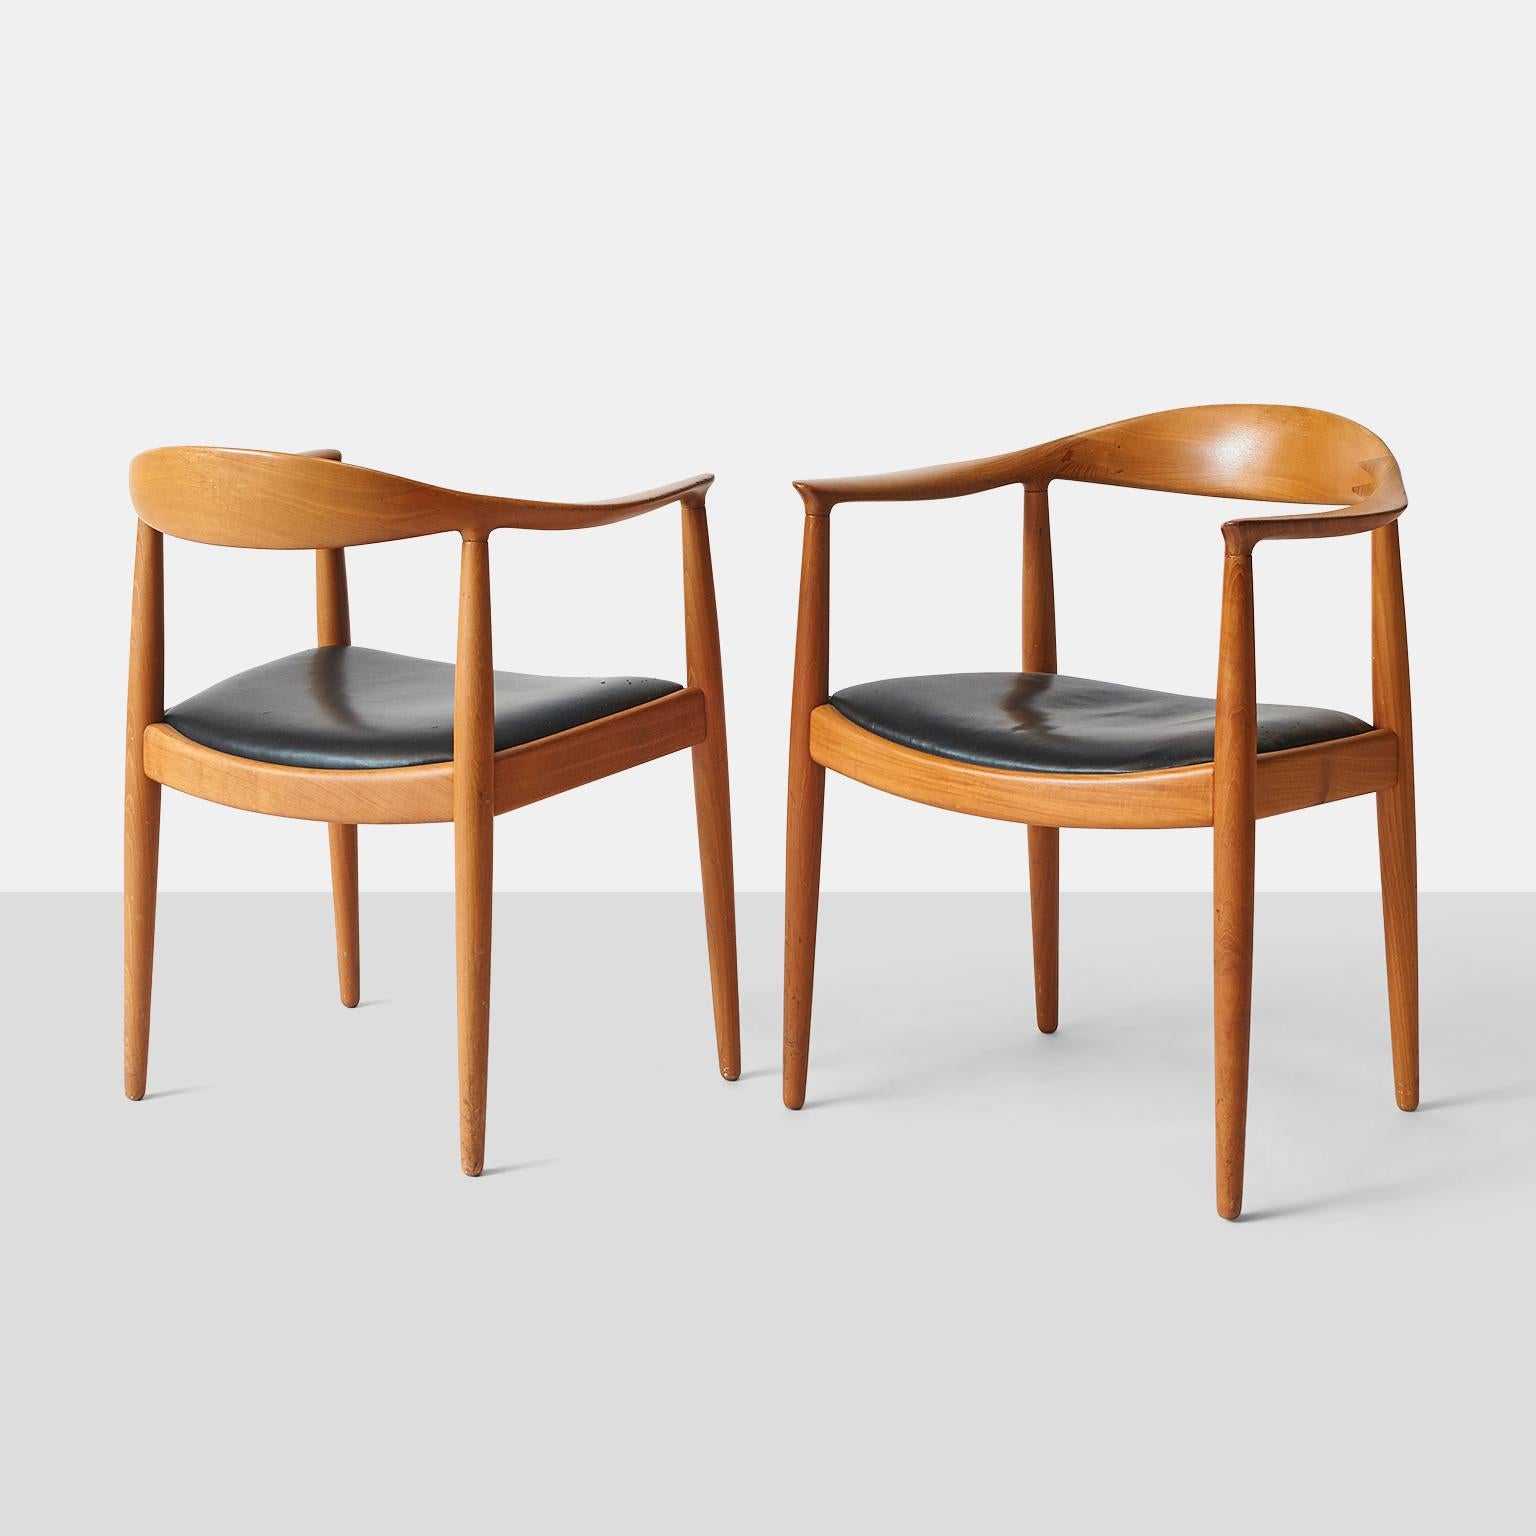 A pair of oak armchairs featuring an inset black leather seat, each having a shaped crest above a black leather seat and tapered legs.

Hans J Wegner 